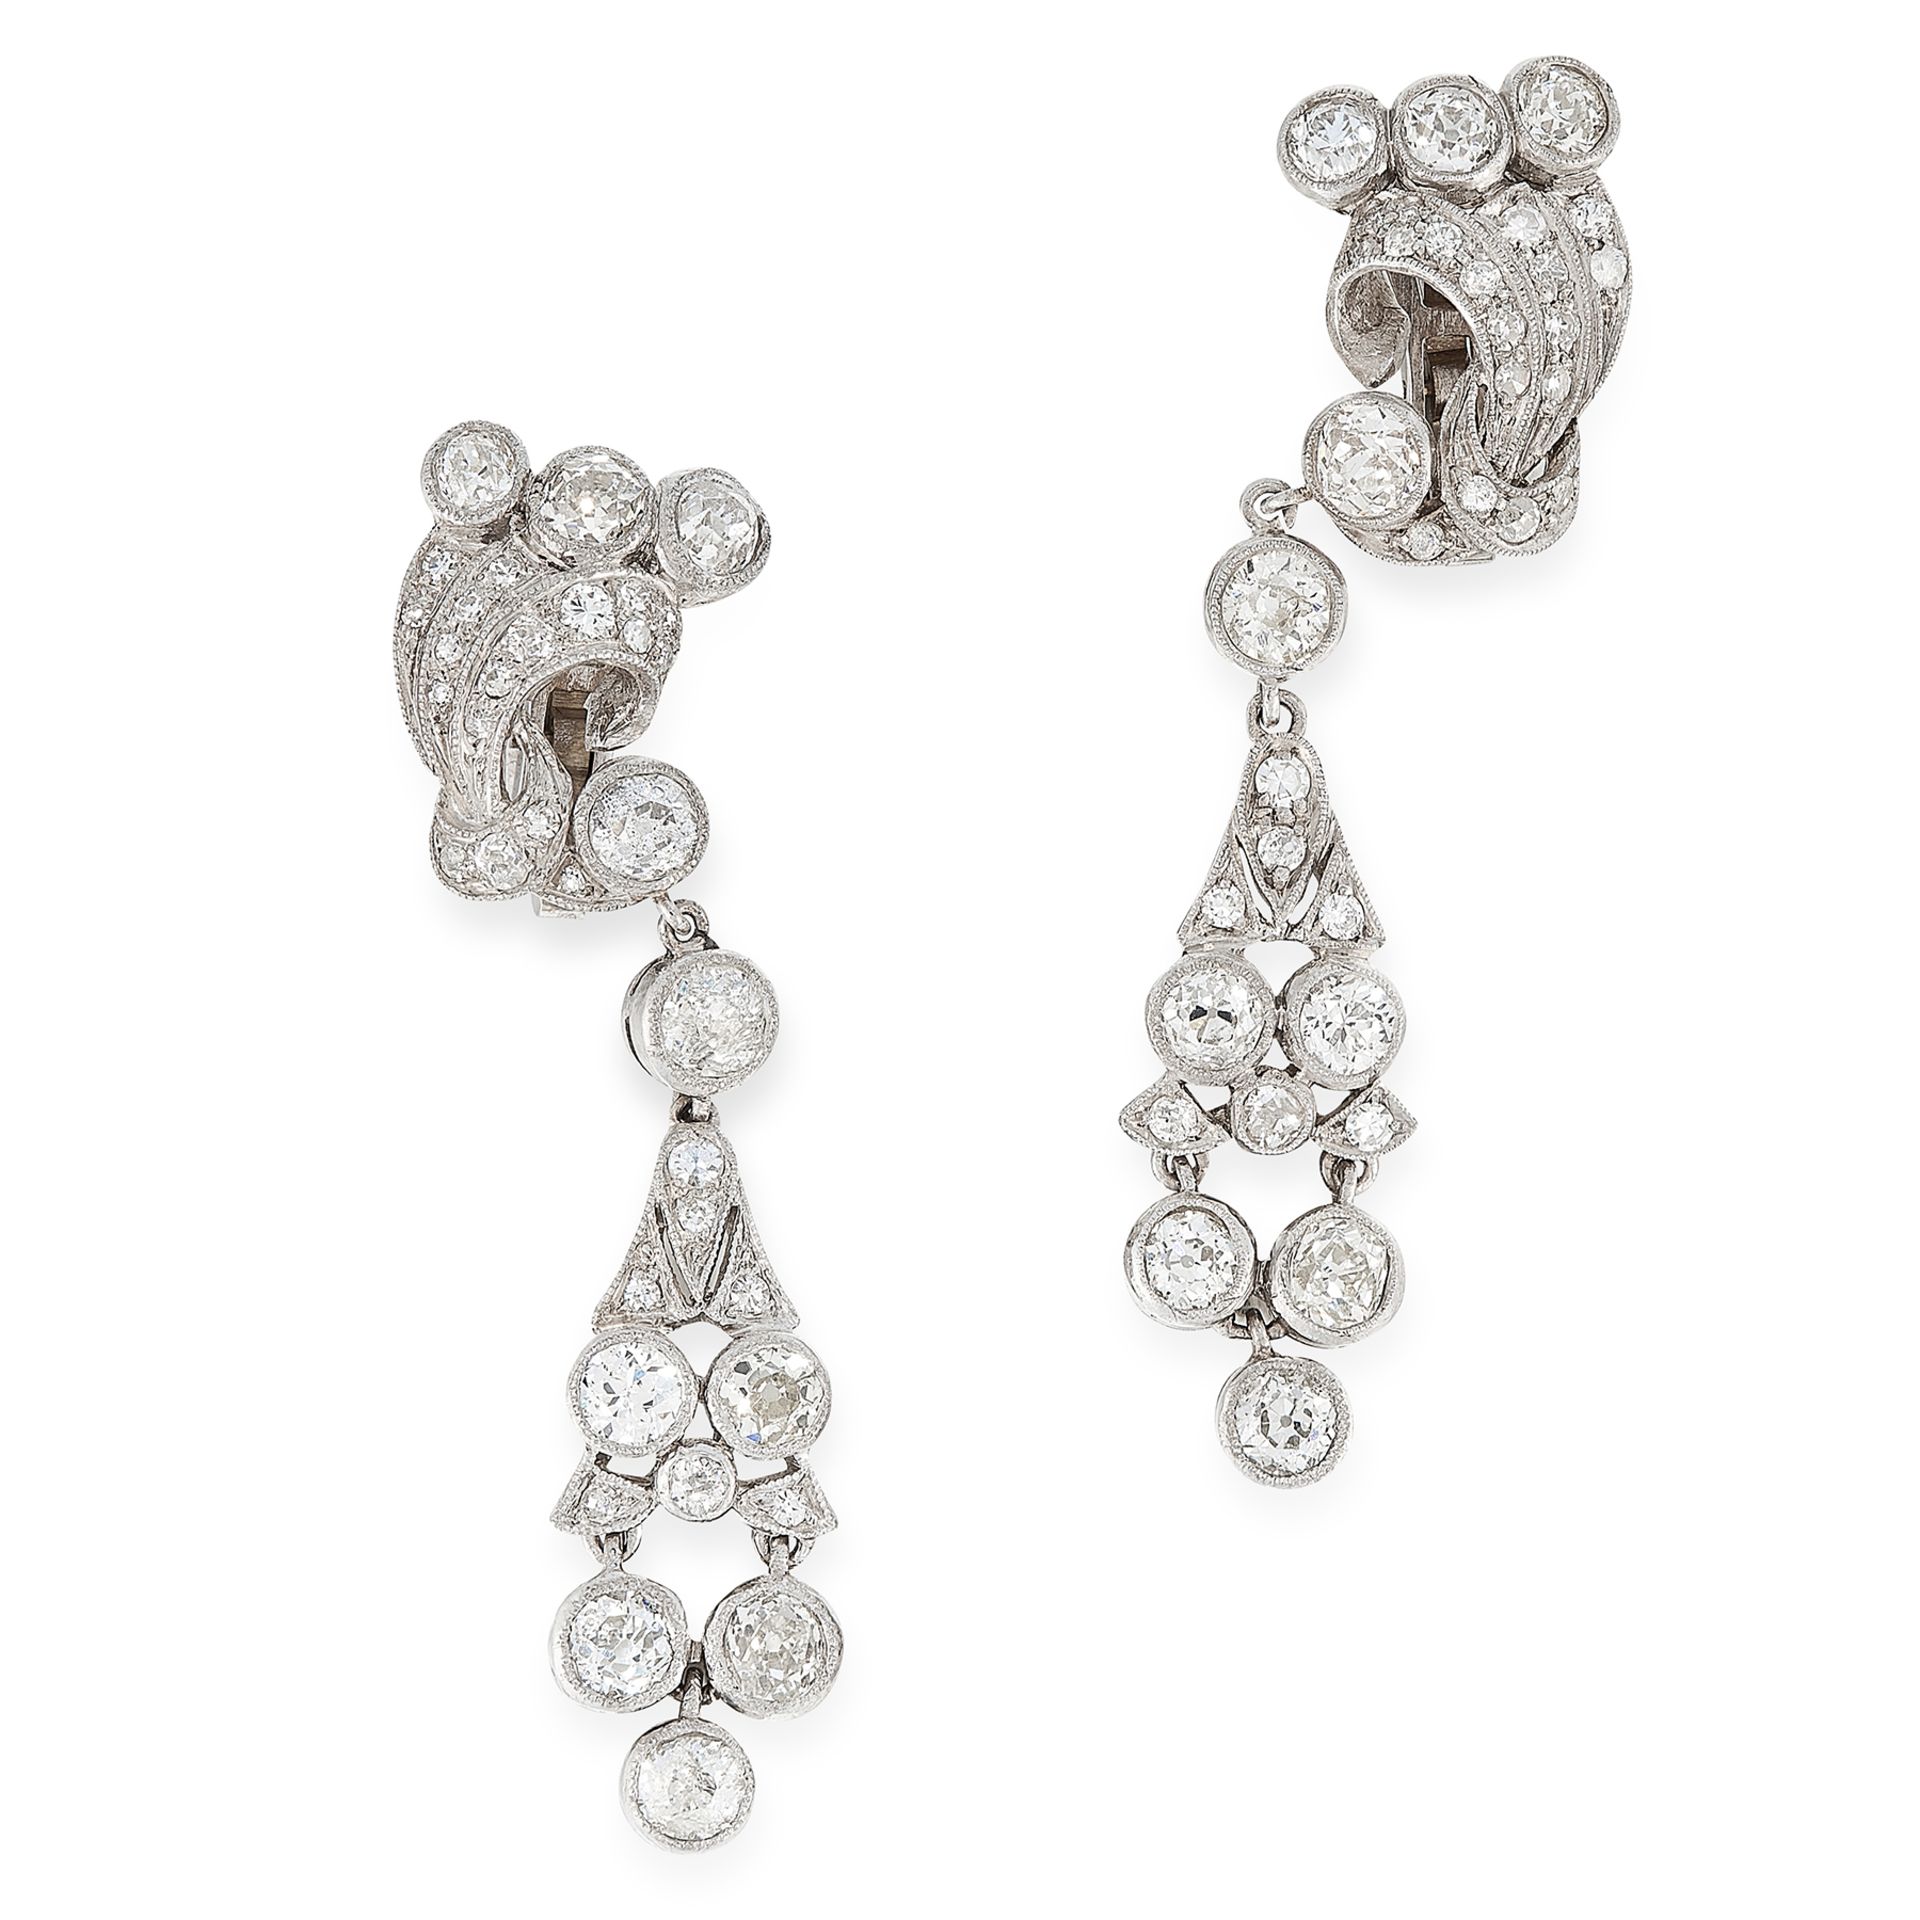 A PAIR OF DIAMOND DROP EARRINGS in platinum and white gold, each formed of a scrolling motif,